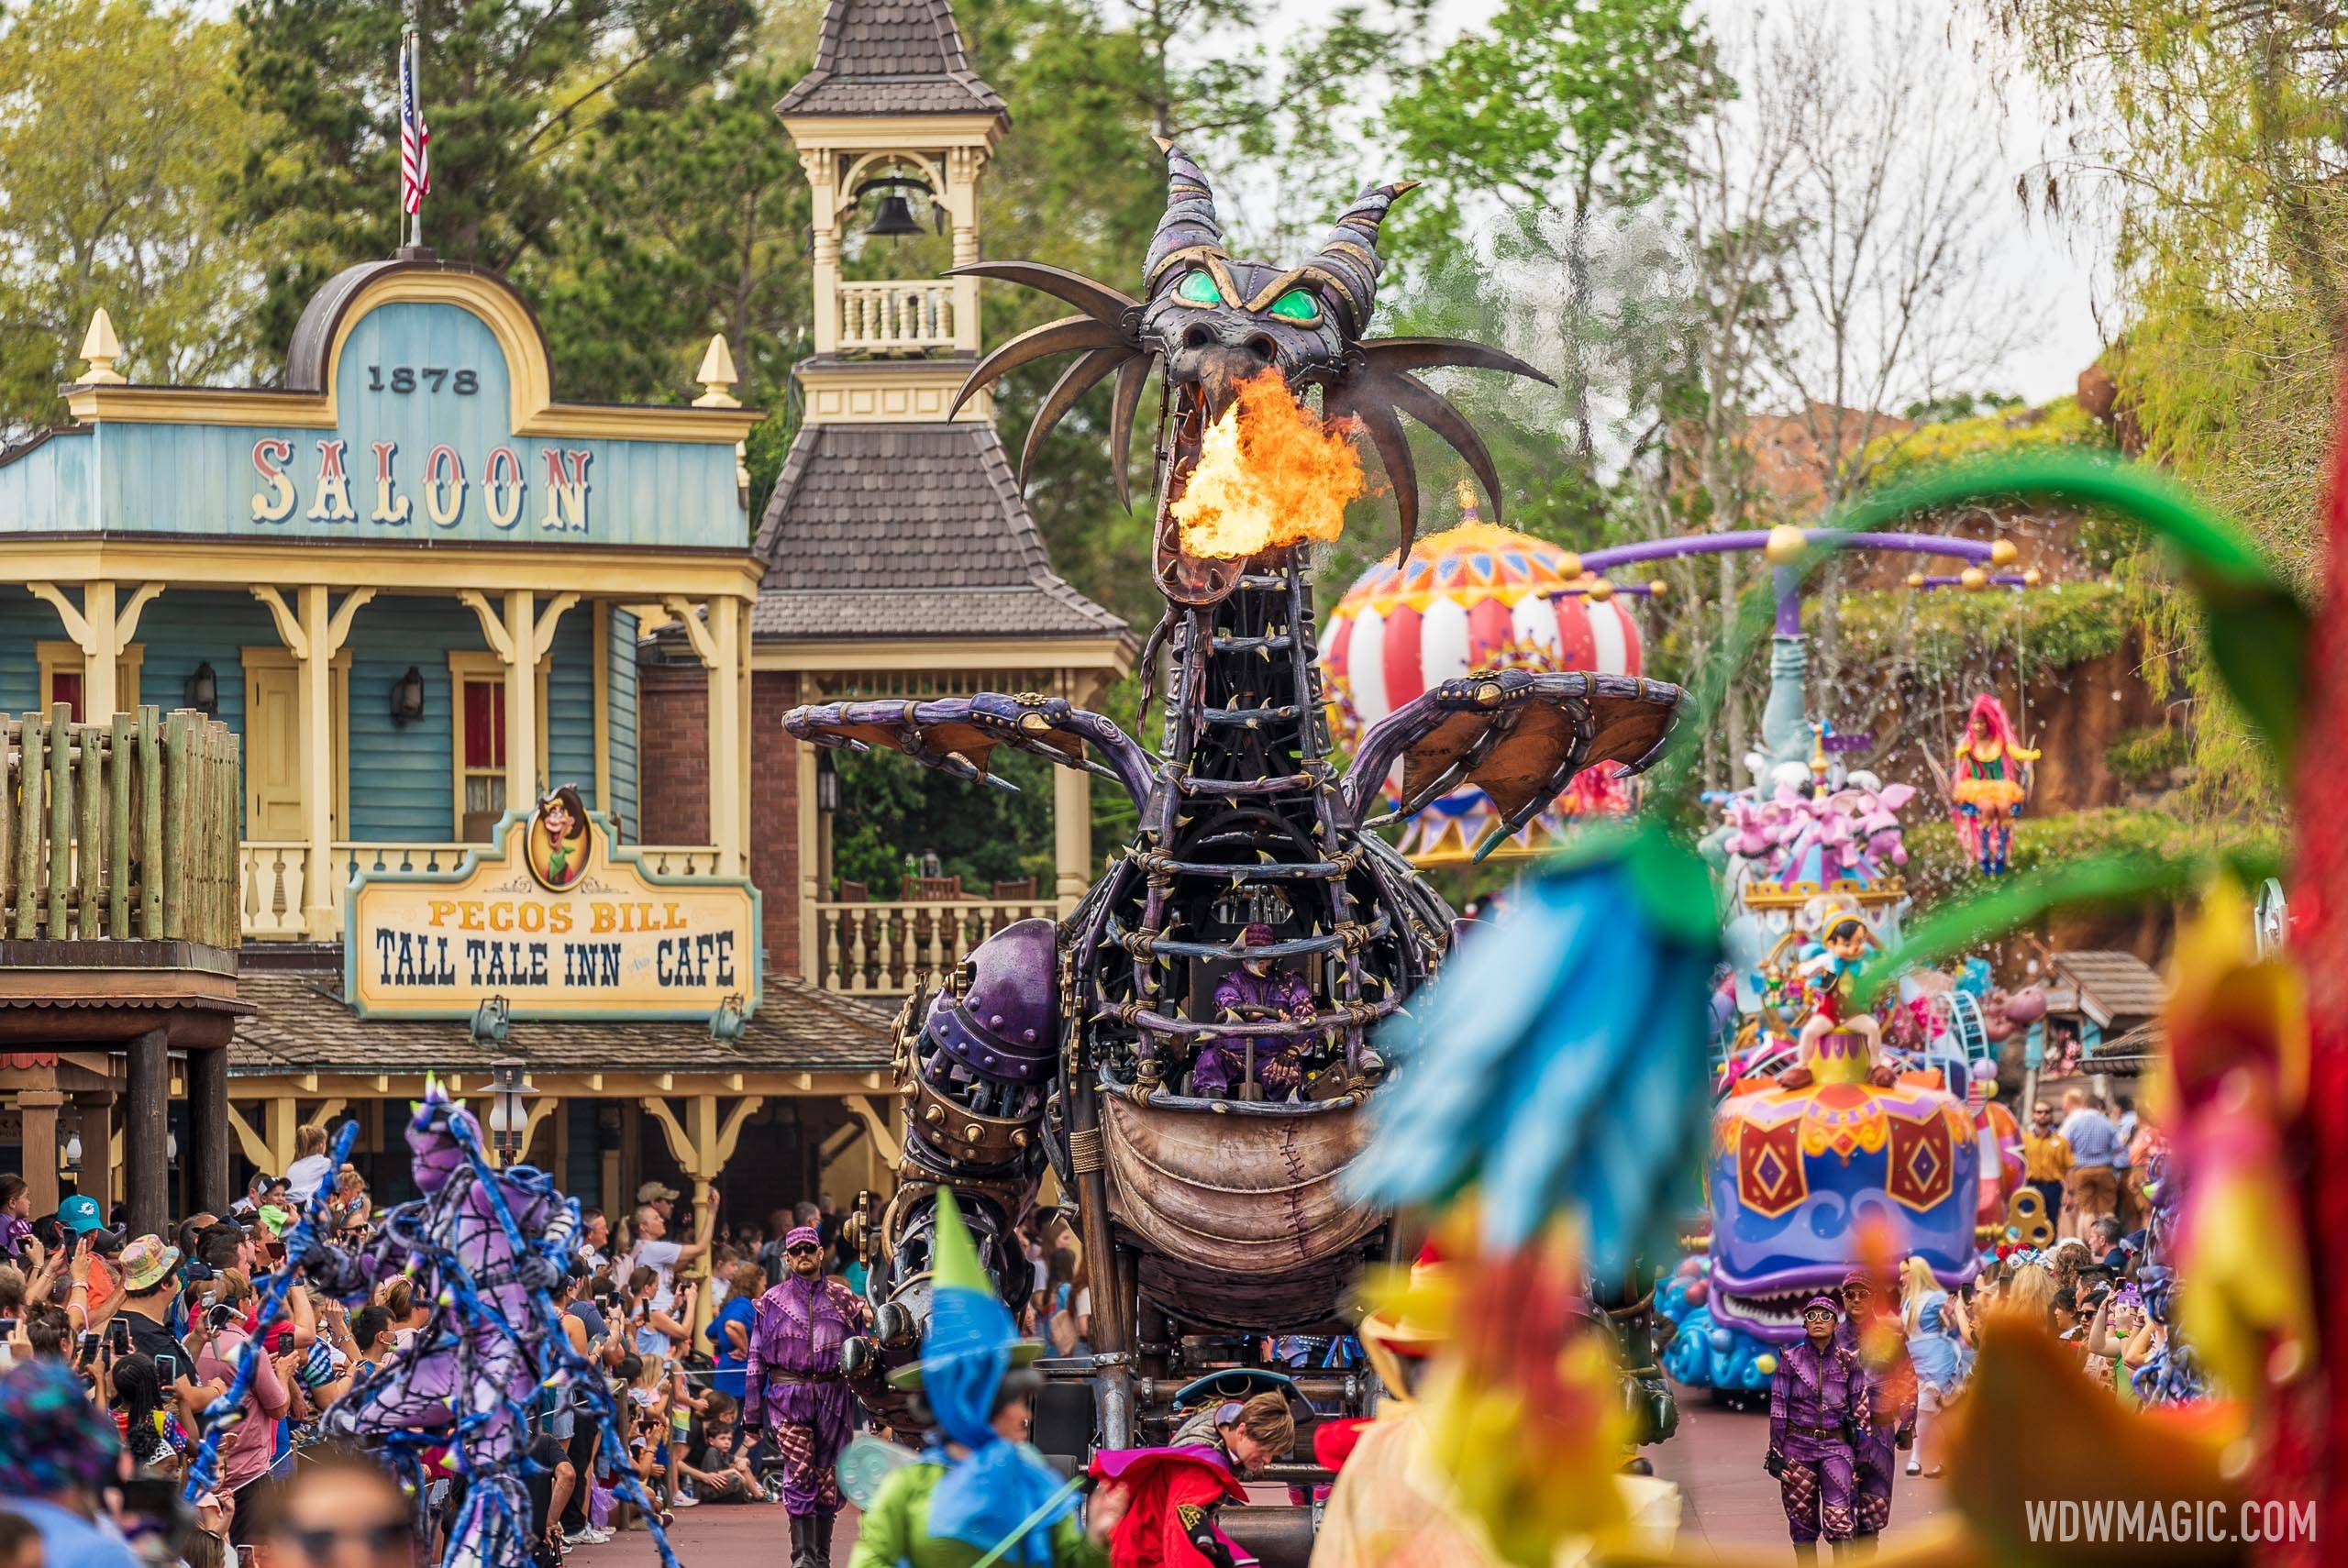 Festival of Fantasy Parade moves to new time slot from August